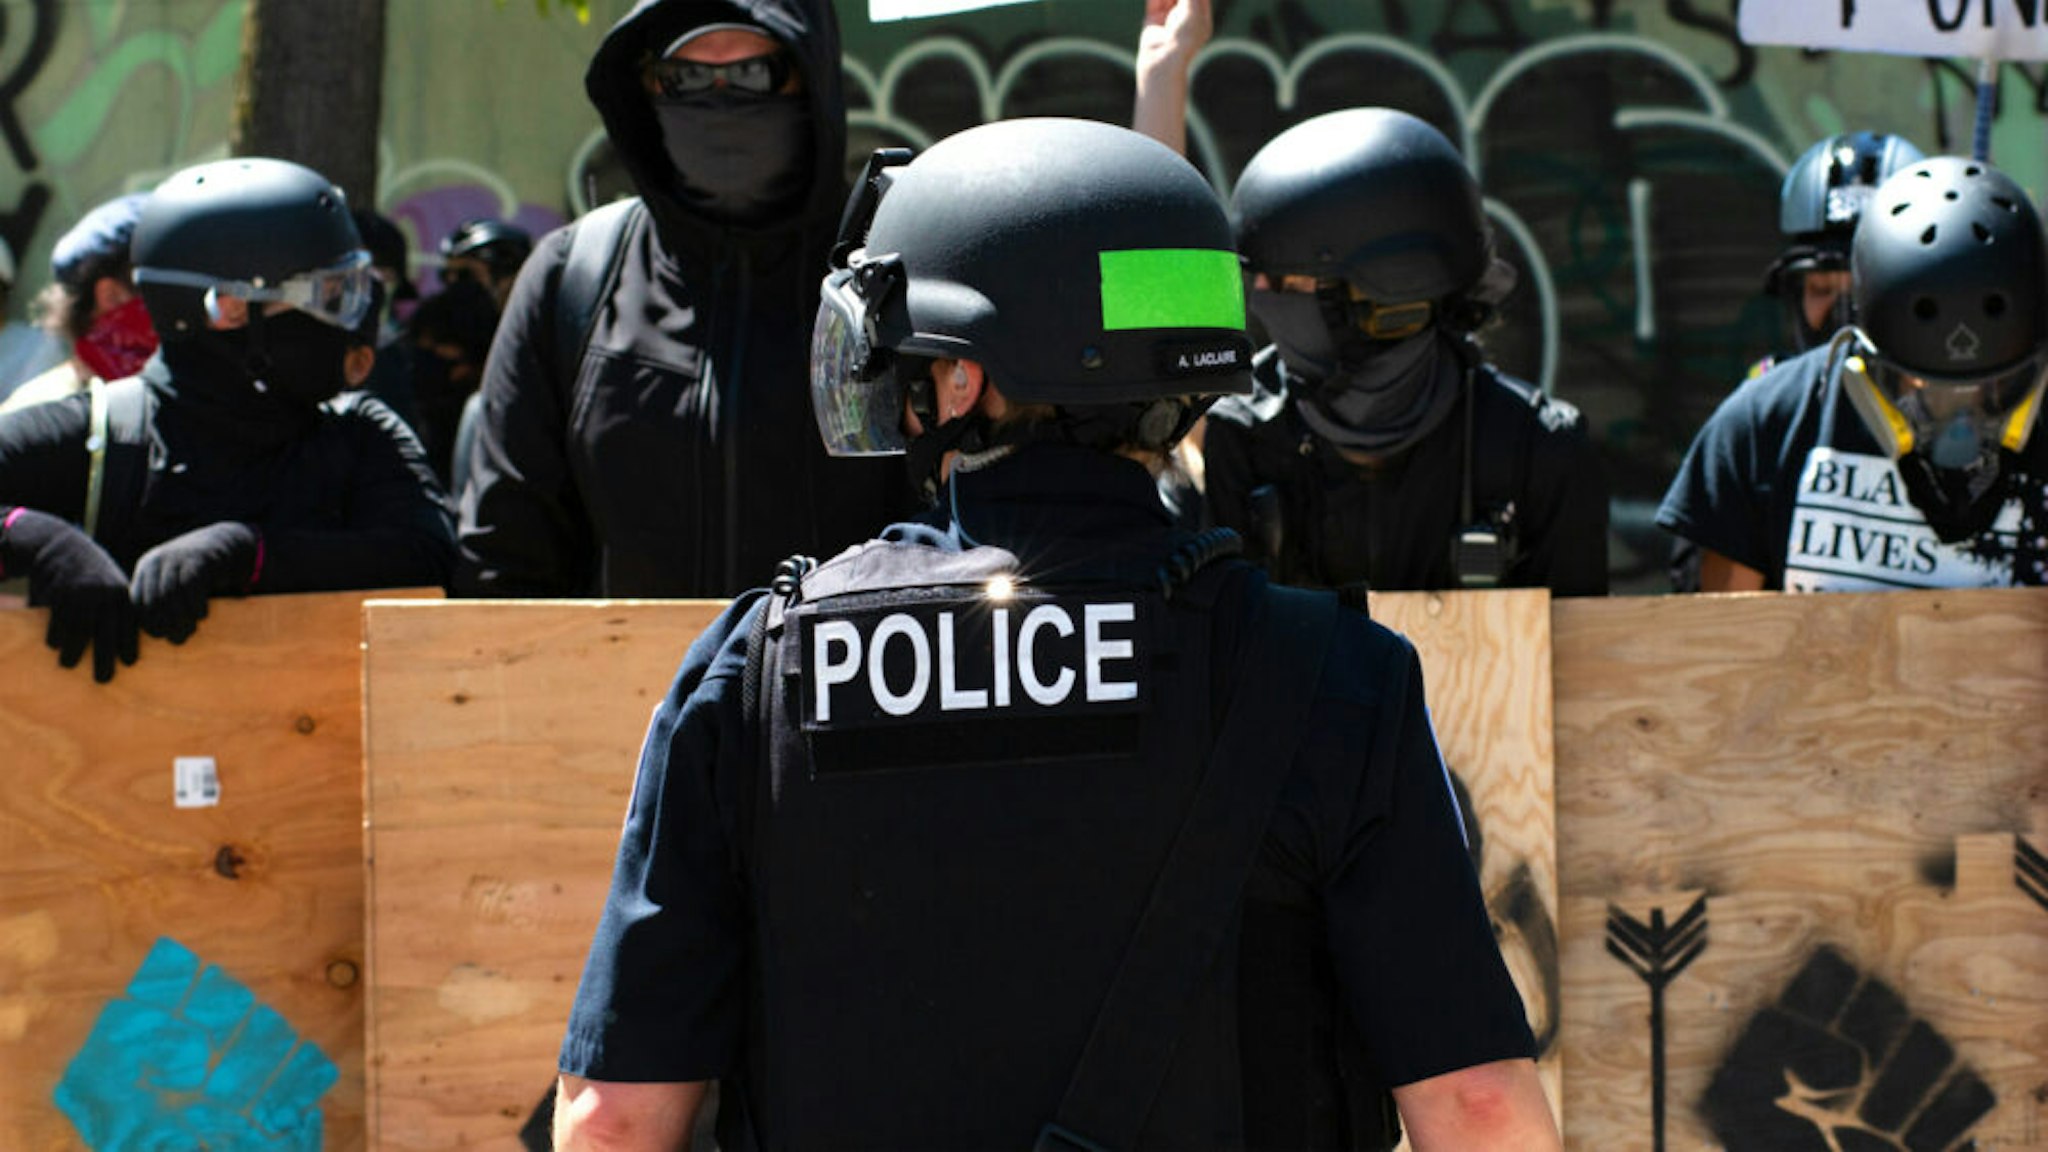 SEATTLE, WASHINGTON - AUGUST 9: A police officer stands in front of counter protesters during the Seattle Police Officers Guildâs rally to stop defunding of the Seattle Police Department on Sunday, August 9, 2020 at Seattle City Hall. The Seattle City Council passed a resolution to reduce the Seattle Police Department by up to 100 officers through layoffs but the council failed to pass a 50% cut of the Police Departmentâs remaining 2020 budget on August 5, 2020.